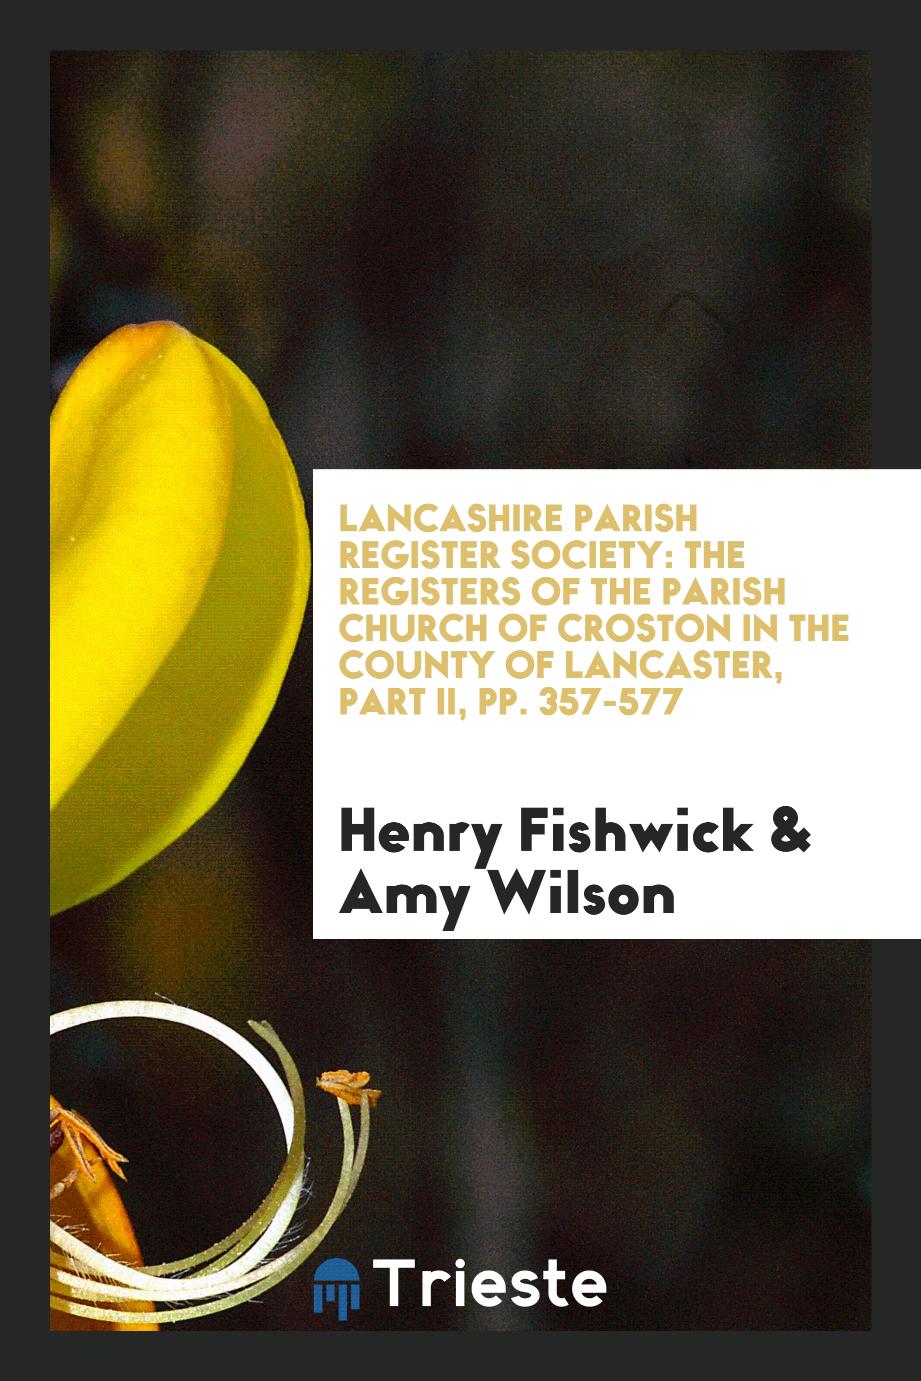 Lancashire Parish Register Society: The Registers of the Parish Church of Croston in the County of Lancaster, Part II, pp. 357-577